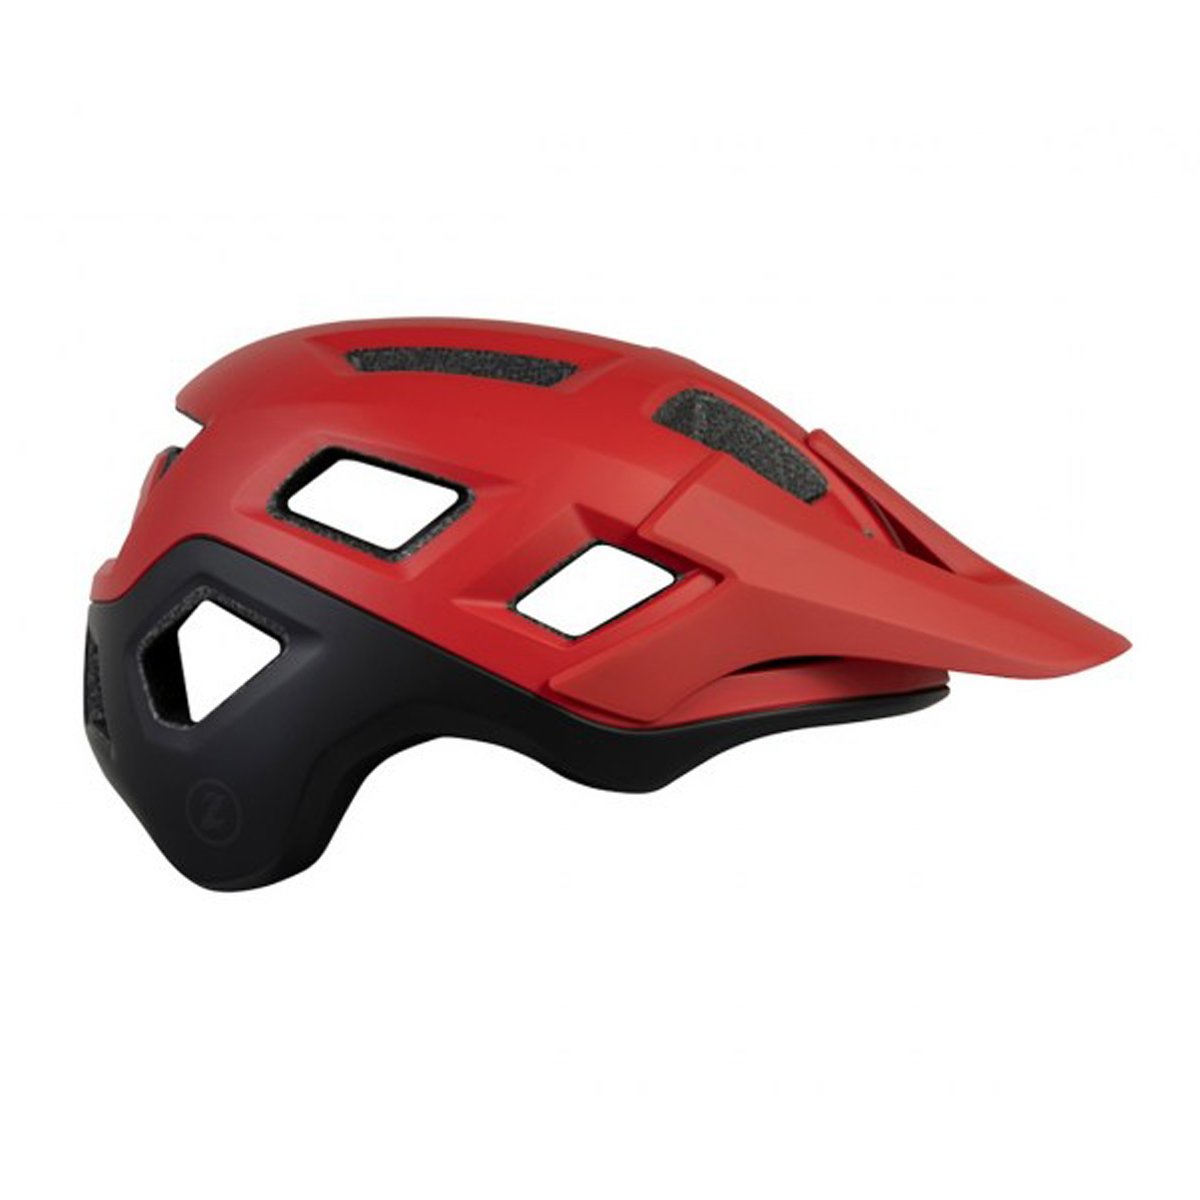 CAPACETE LAZER COYOTE VERMELHO - IN MOLD CICLISMO